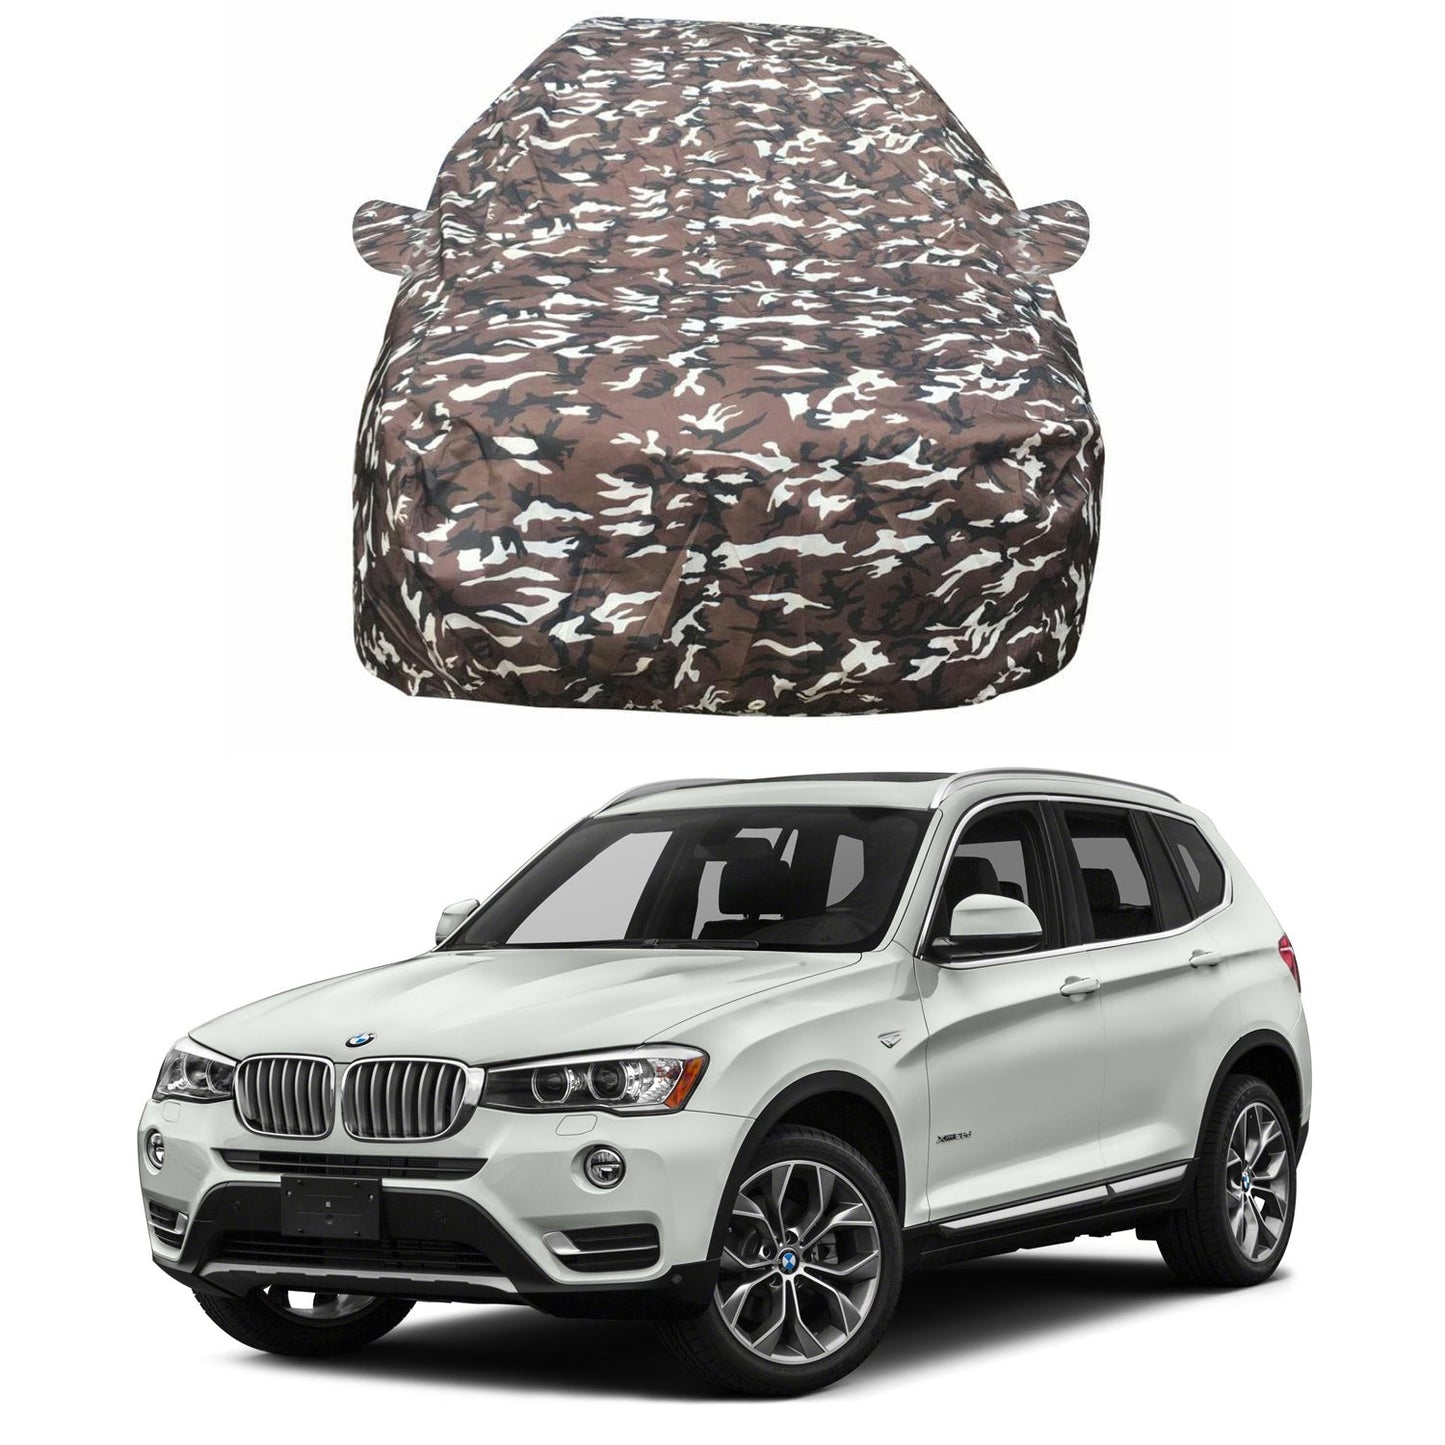 Oshotto Ranger Design Made of 100% Waterproof Fabric Multicolor Car Body Cover with Mirror Pockets For BMW X3